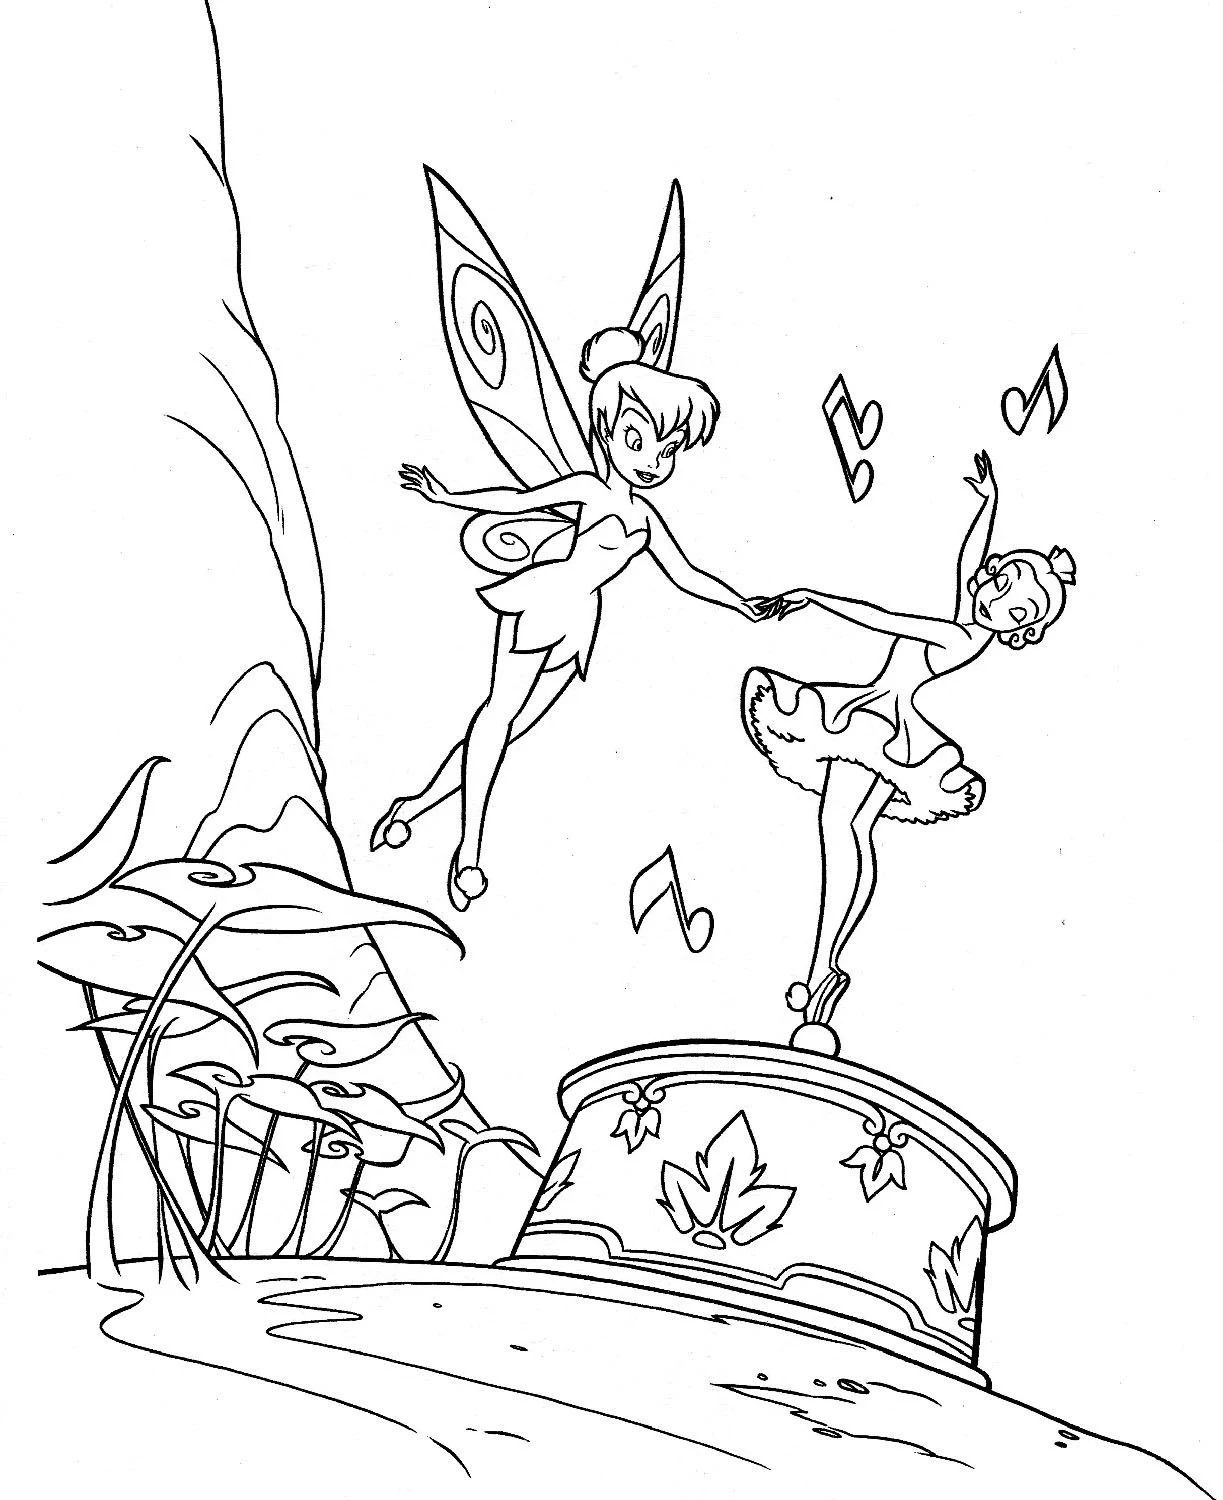 Tinkerbell Coloring Pages Singing and Dancing with a Atatue of